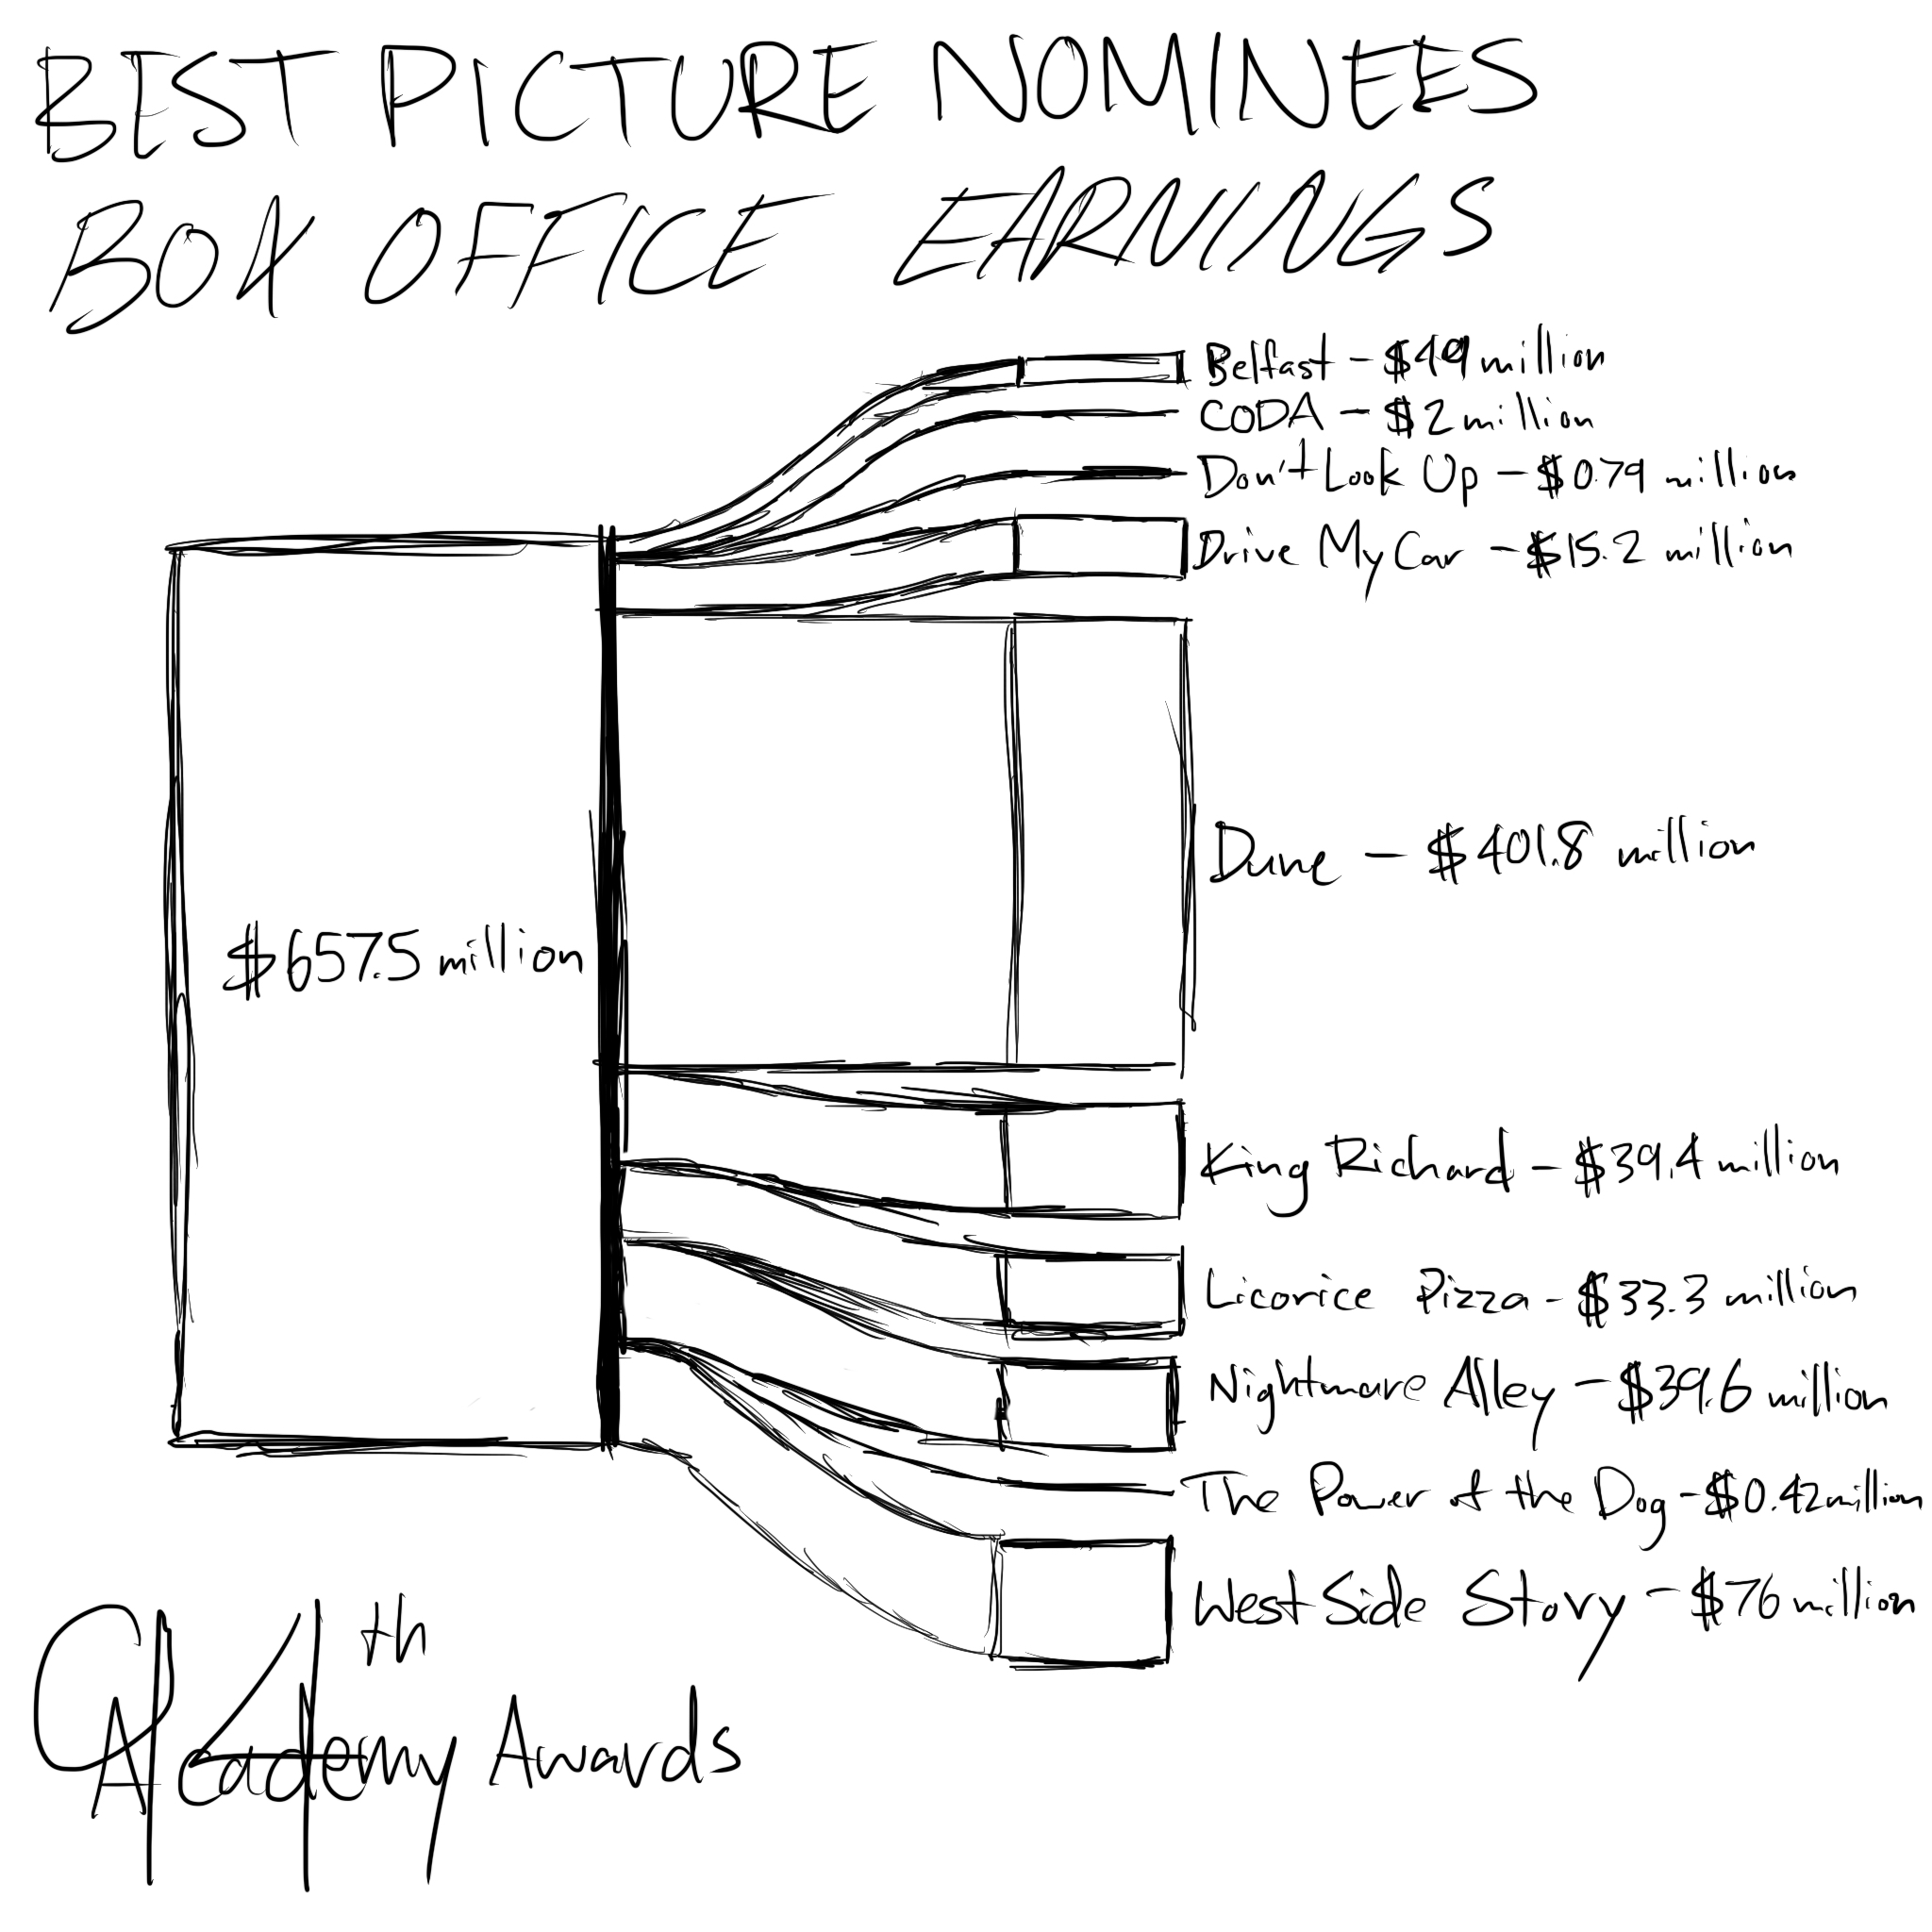 A rough sketch of bar graphs showing movie award nomination wins.